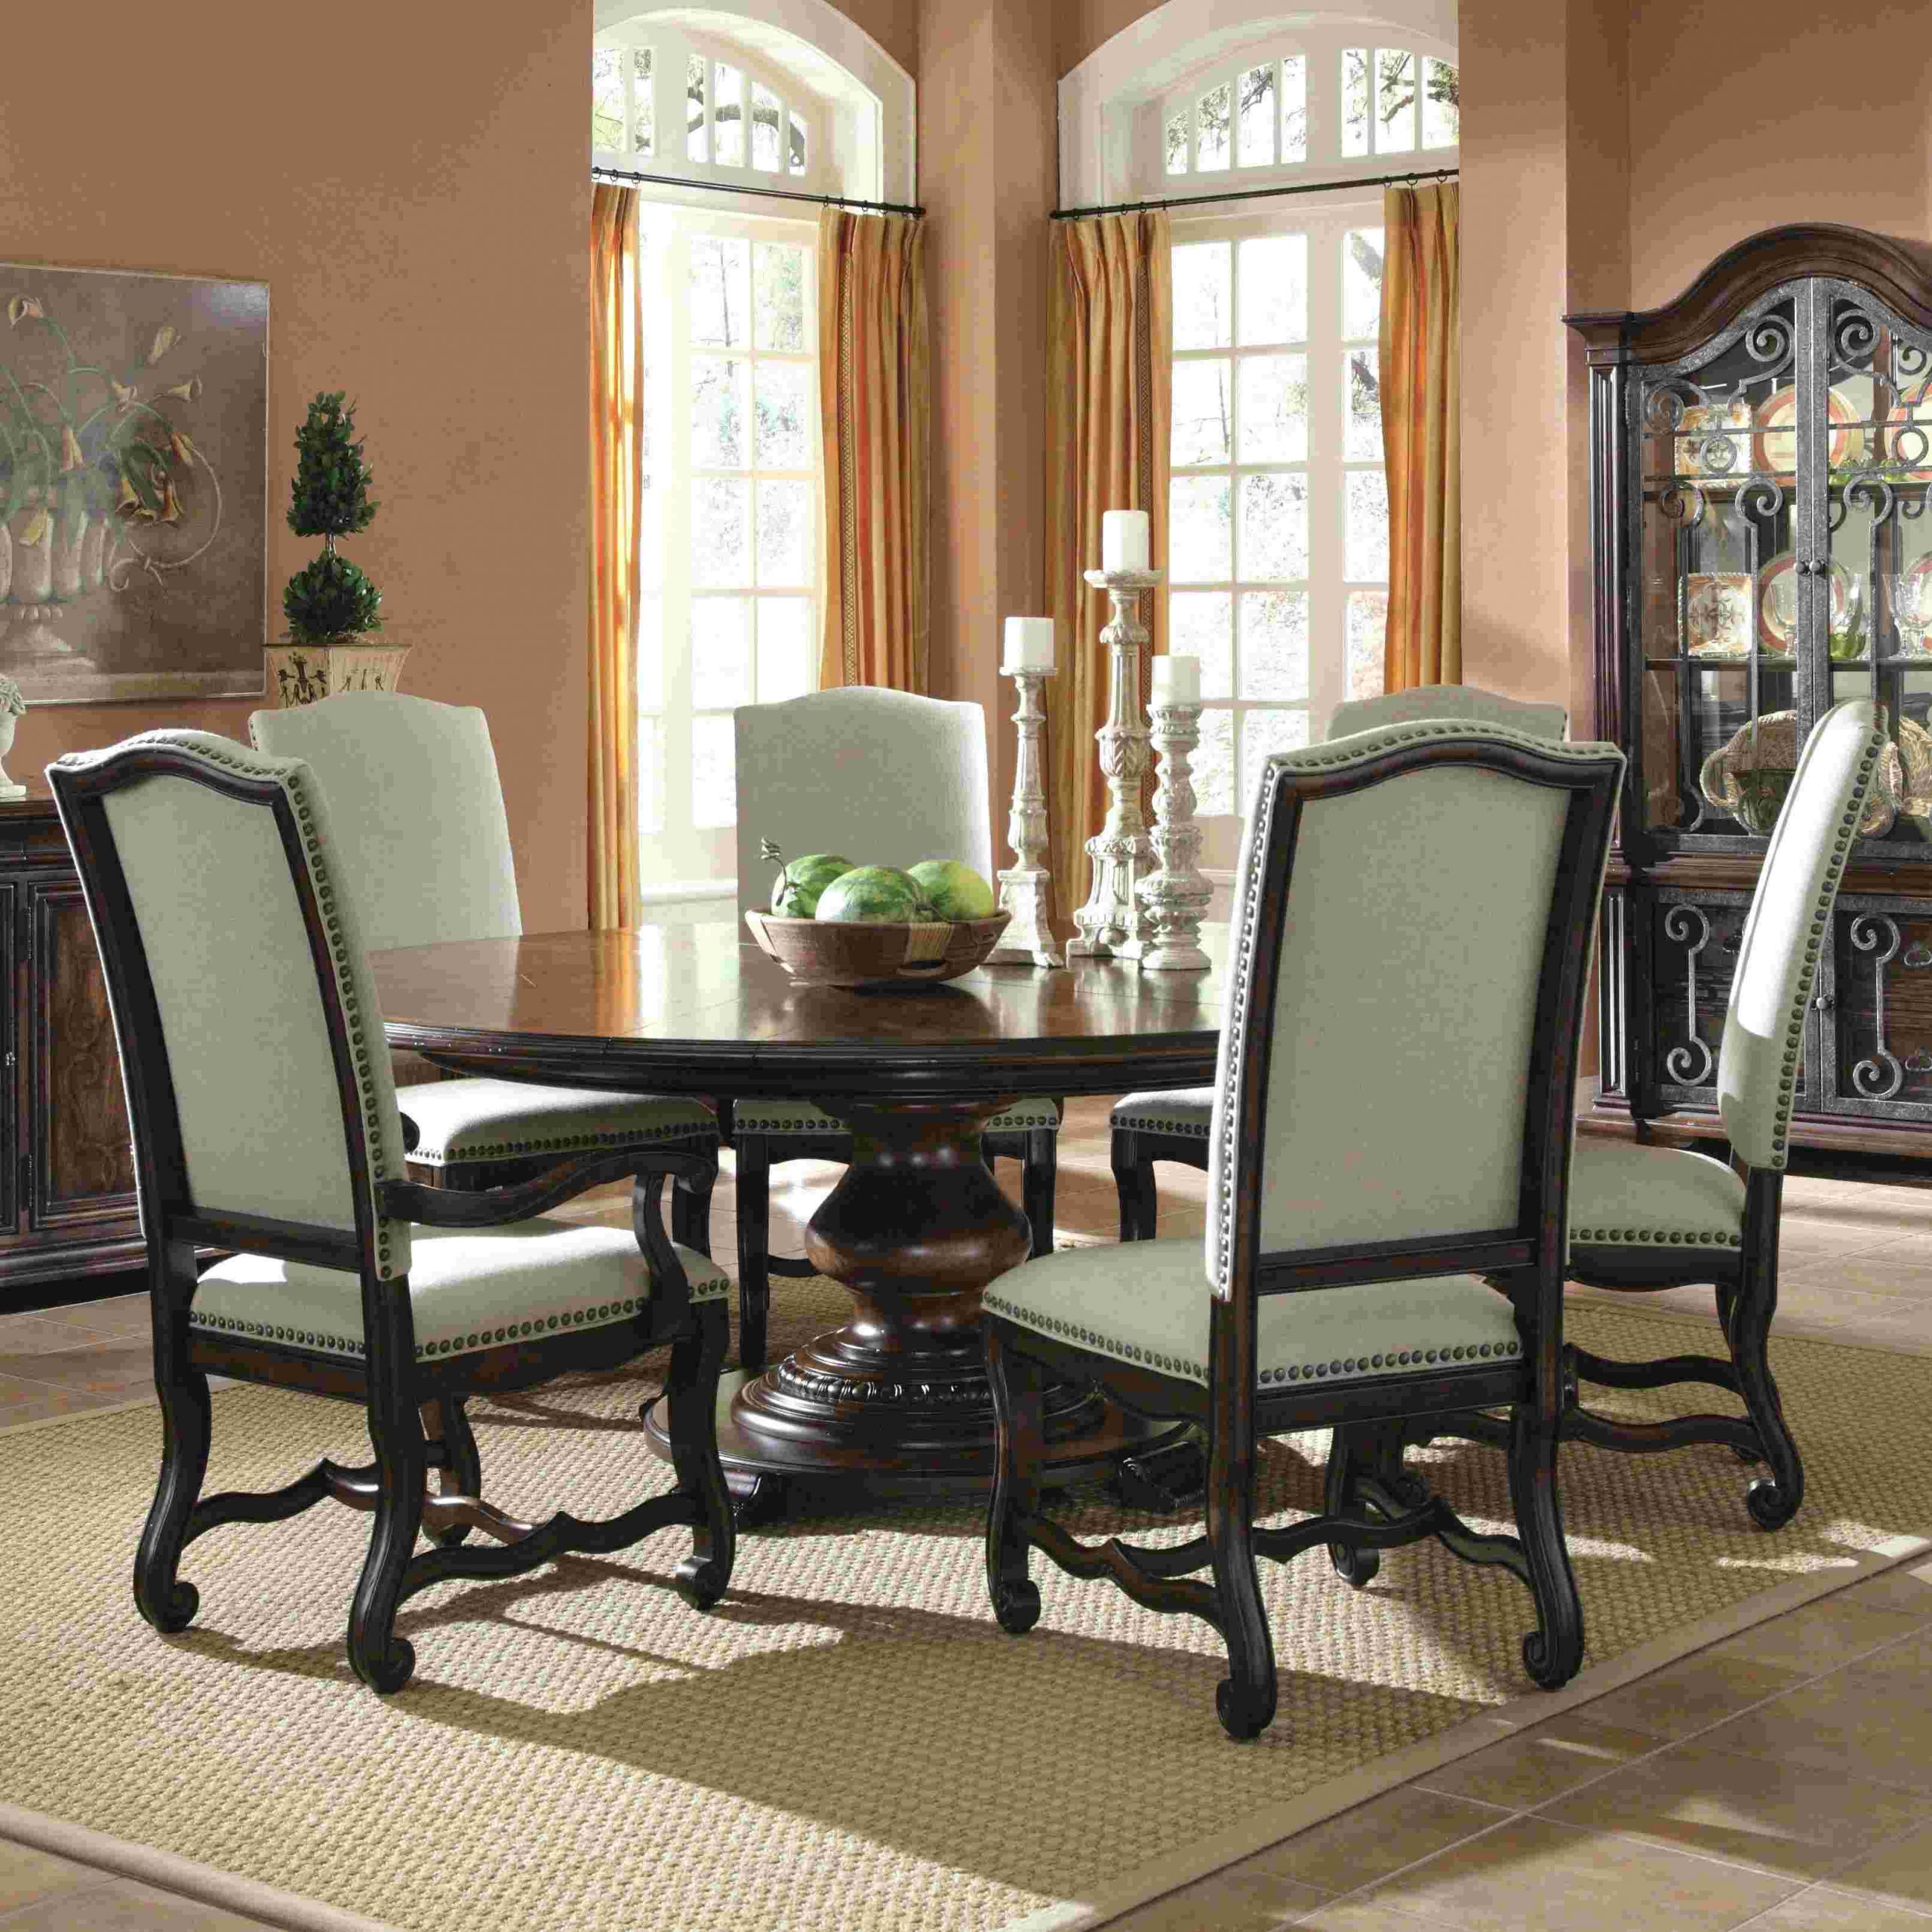 Second Hand Dining Room Chairs Durban • Faucet Ideas Site